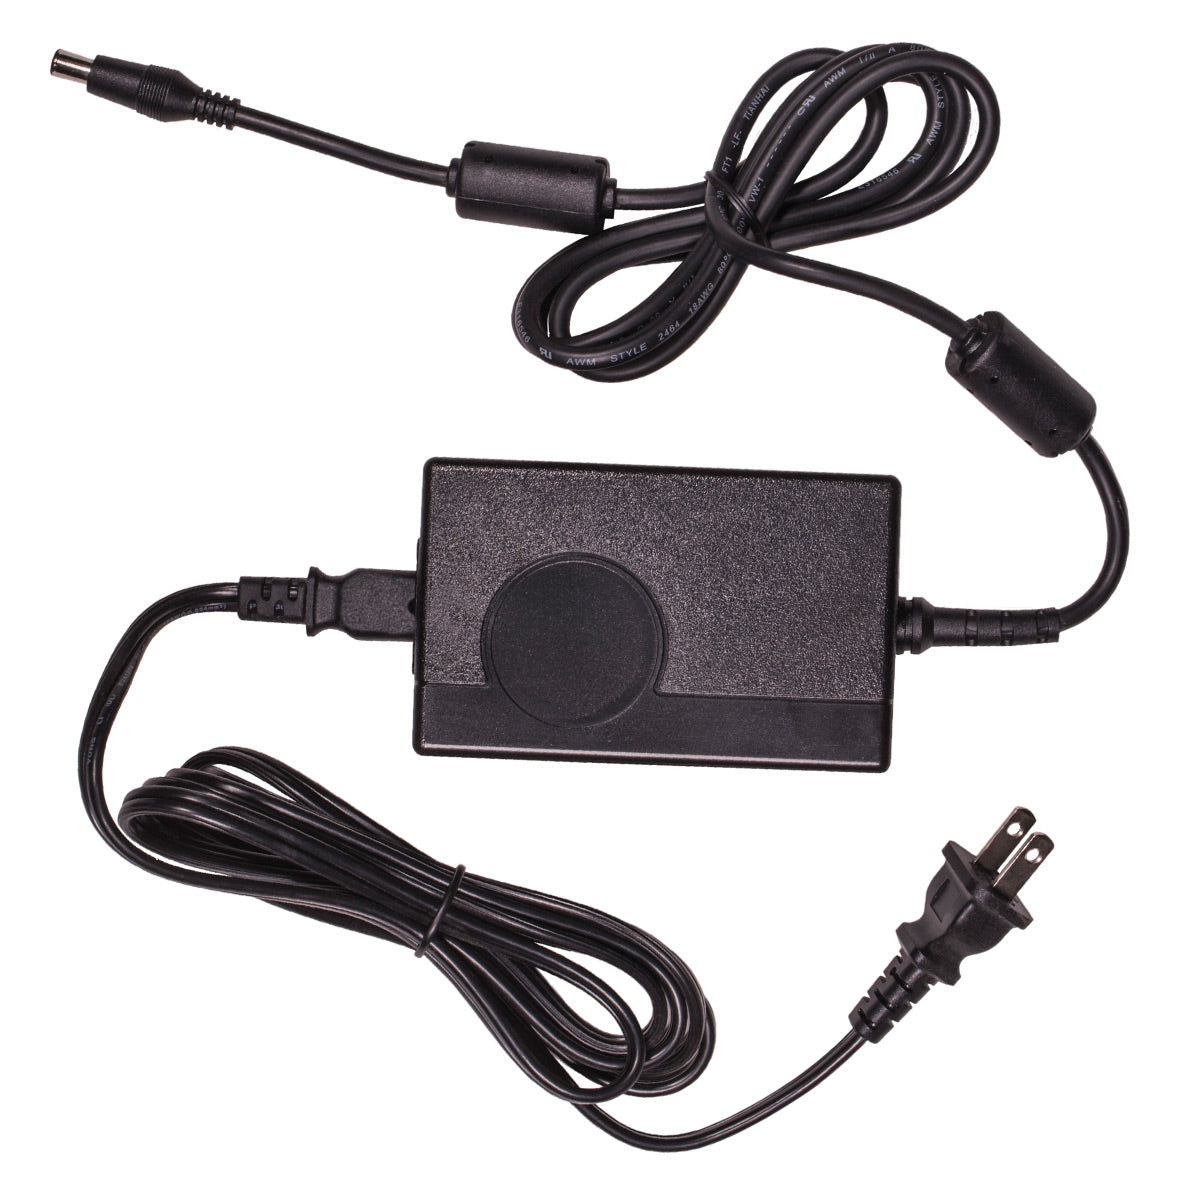 AC Power Supply with Cord for Transcend 365 Series miniCPAP Machines